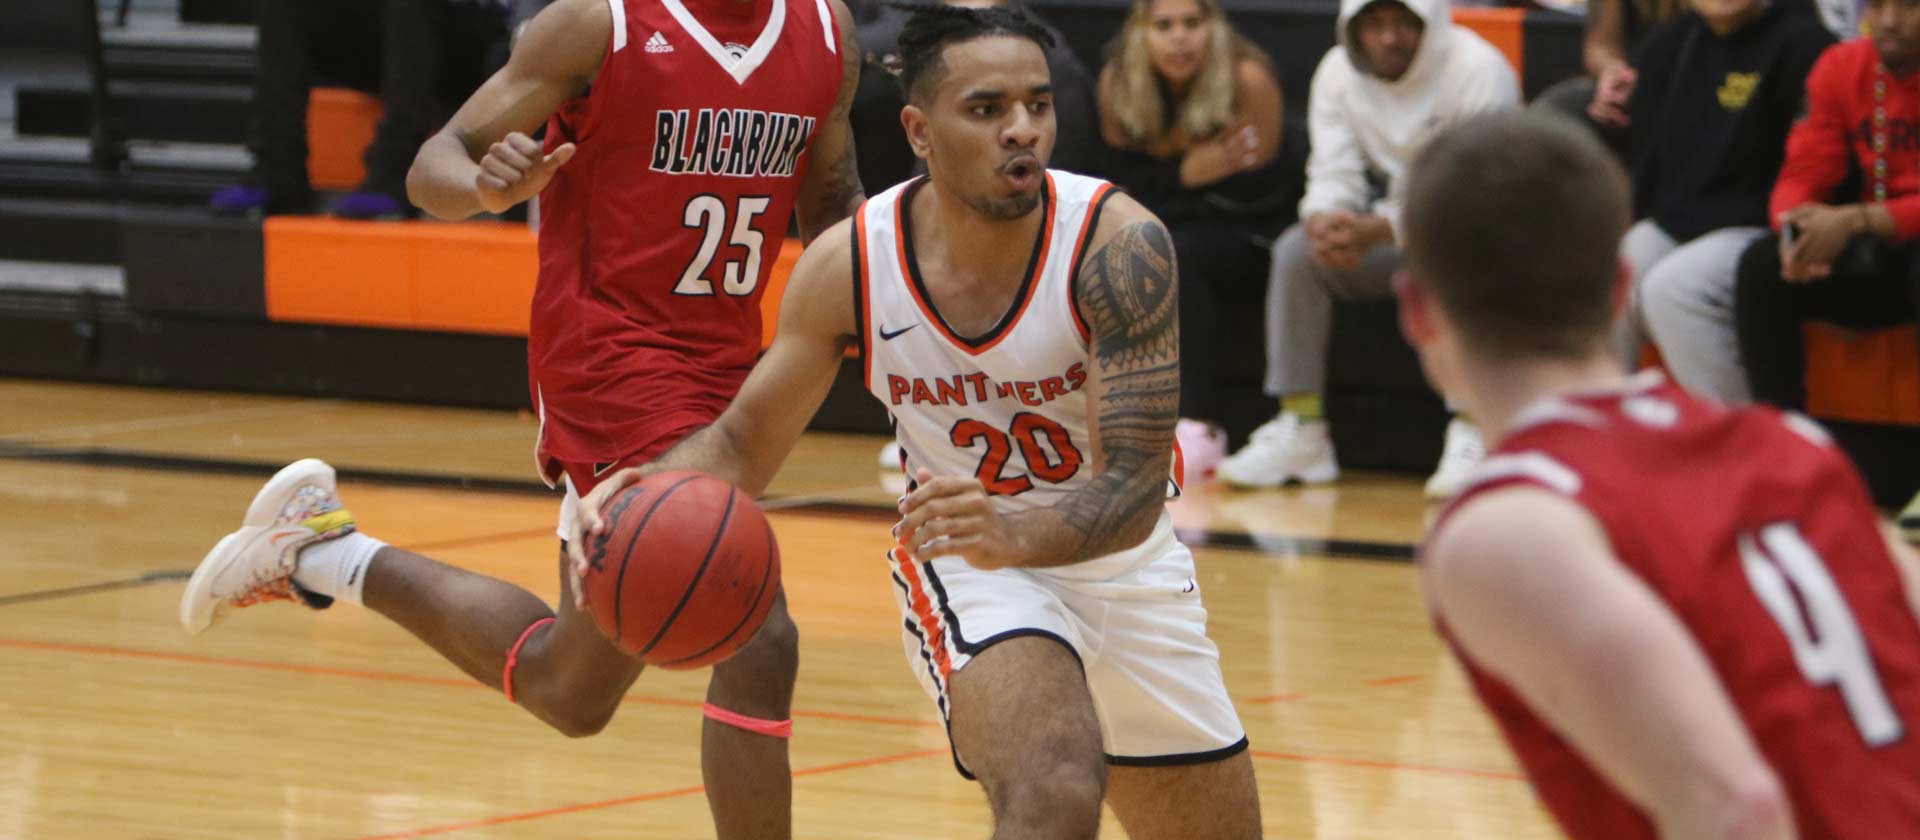 Men's basketball topped 134-108 at Westminster